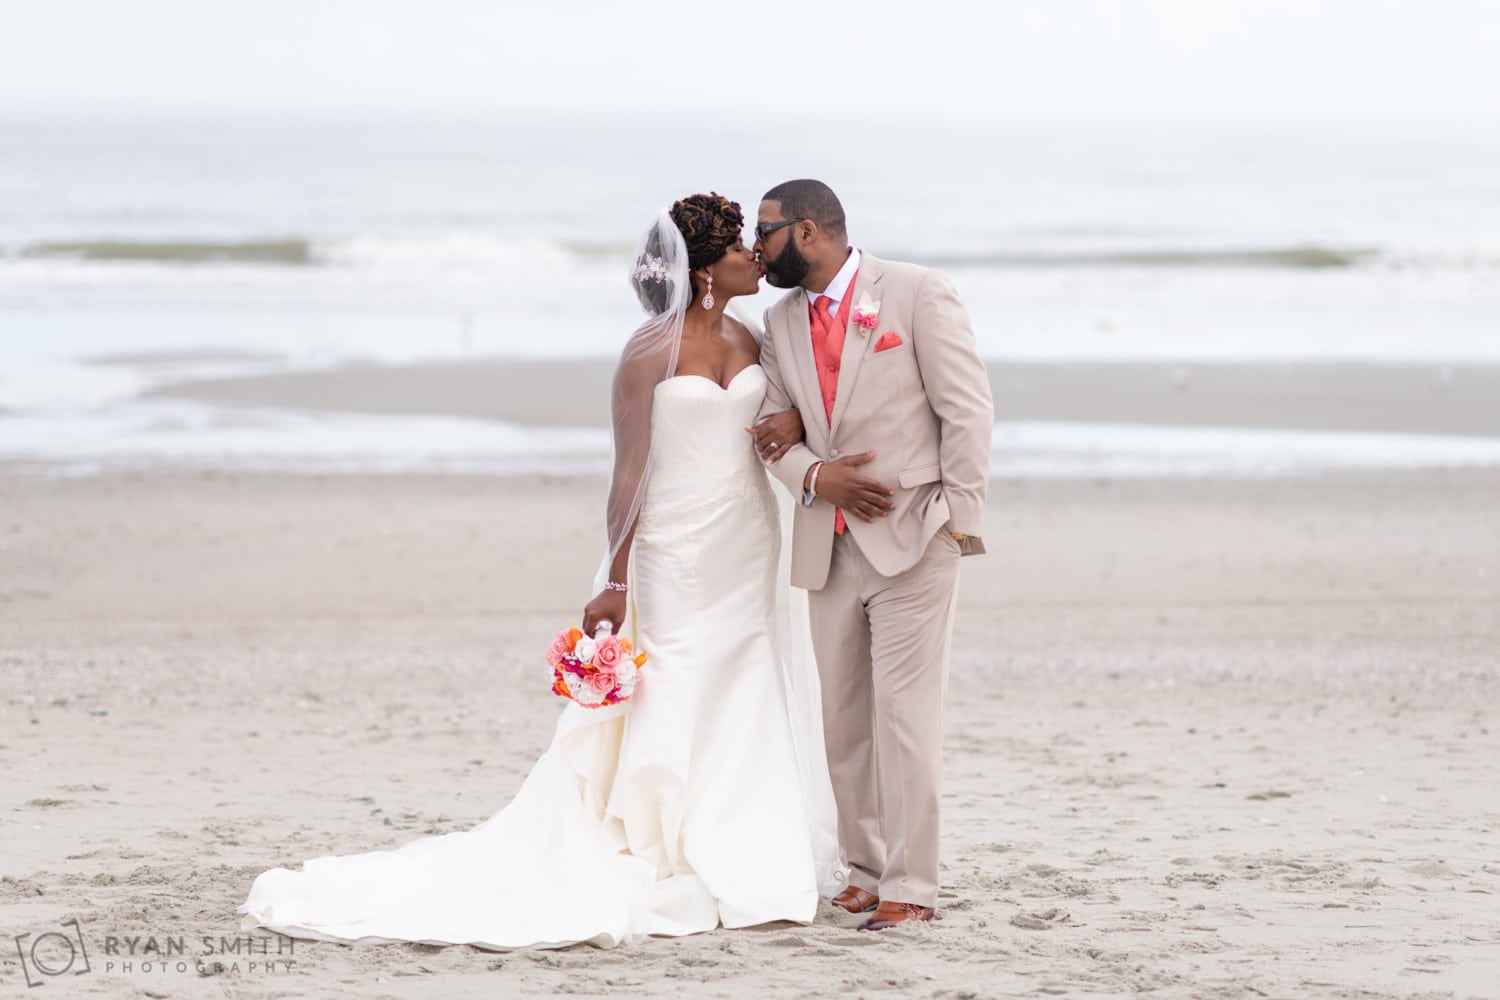 Bride and groom kissing in front of the ocean - Doubletree Resort - Myrtle Beach